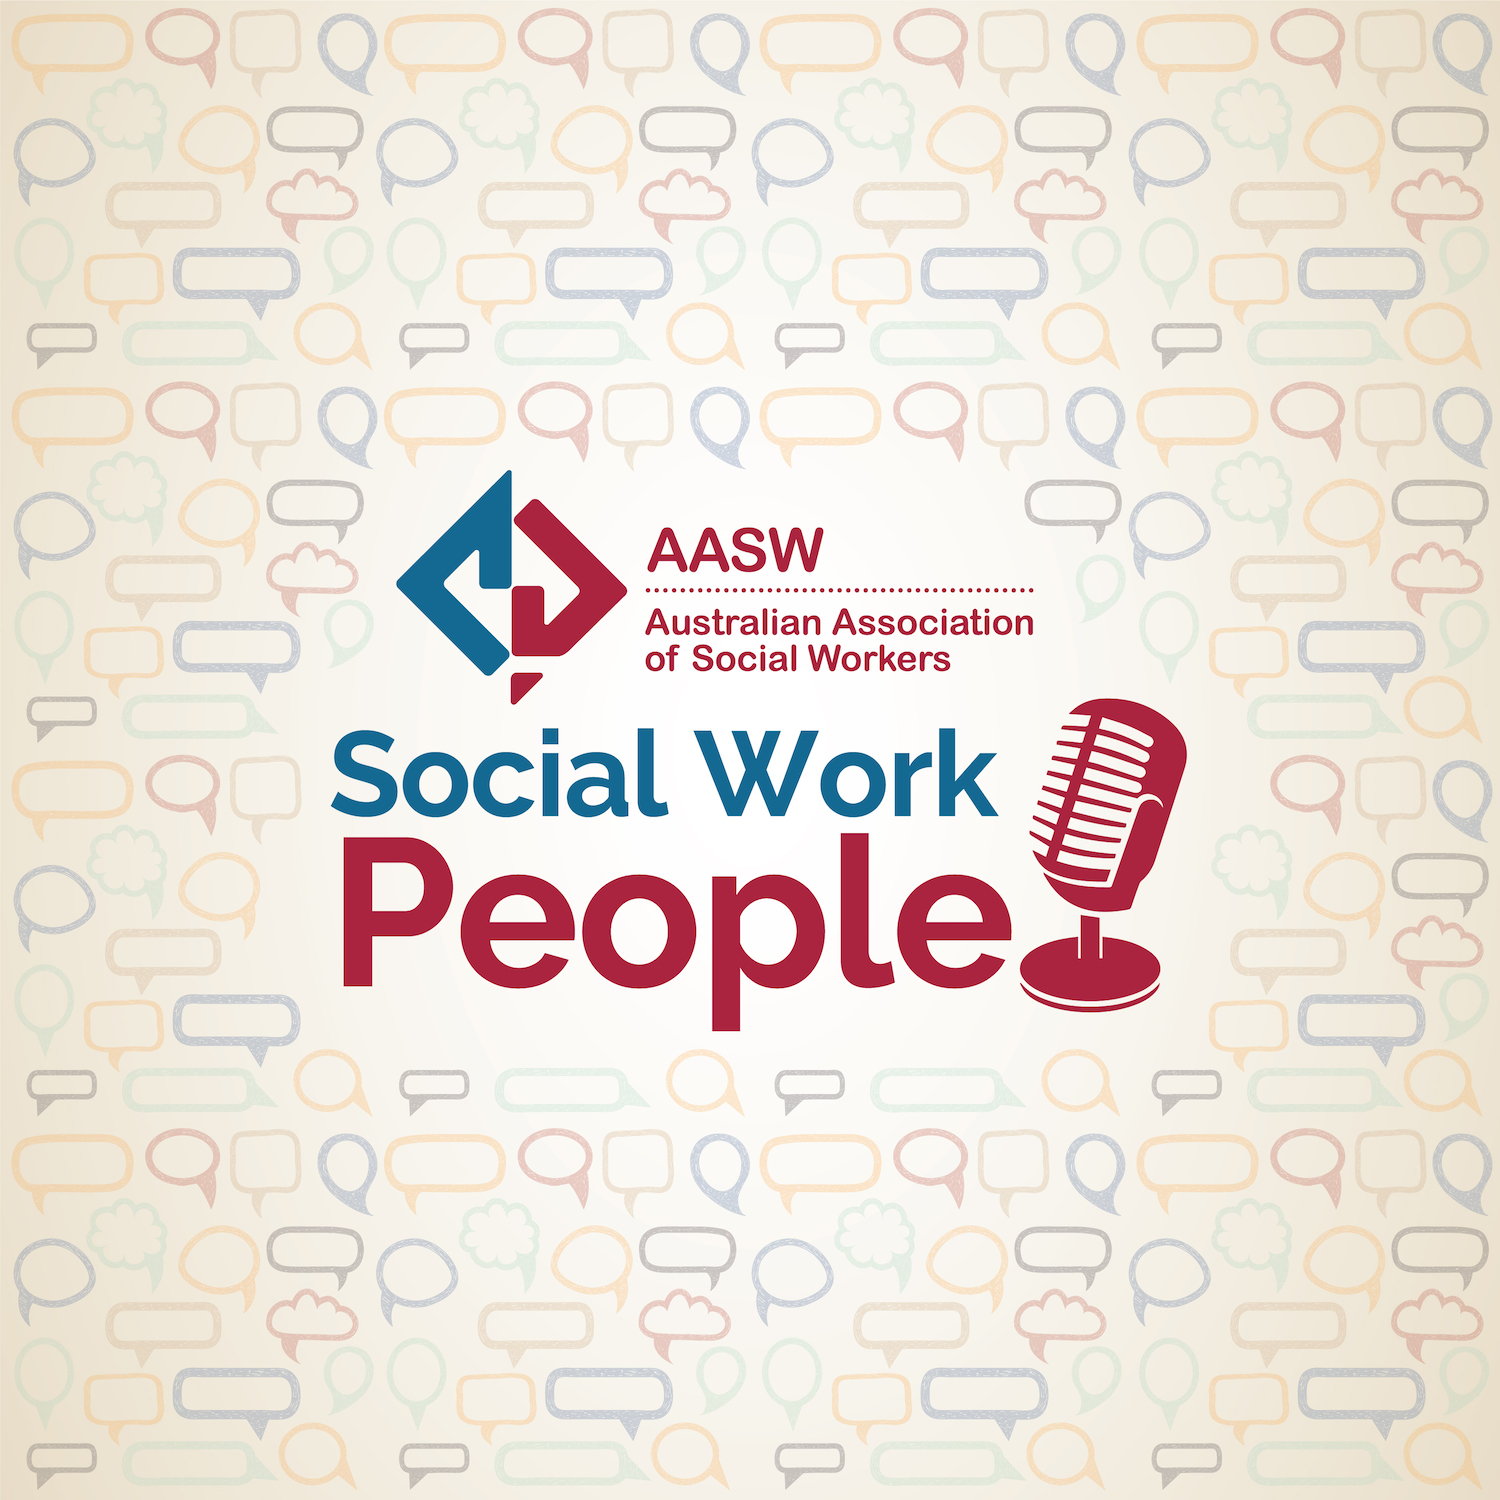 A new podcast series from AASW